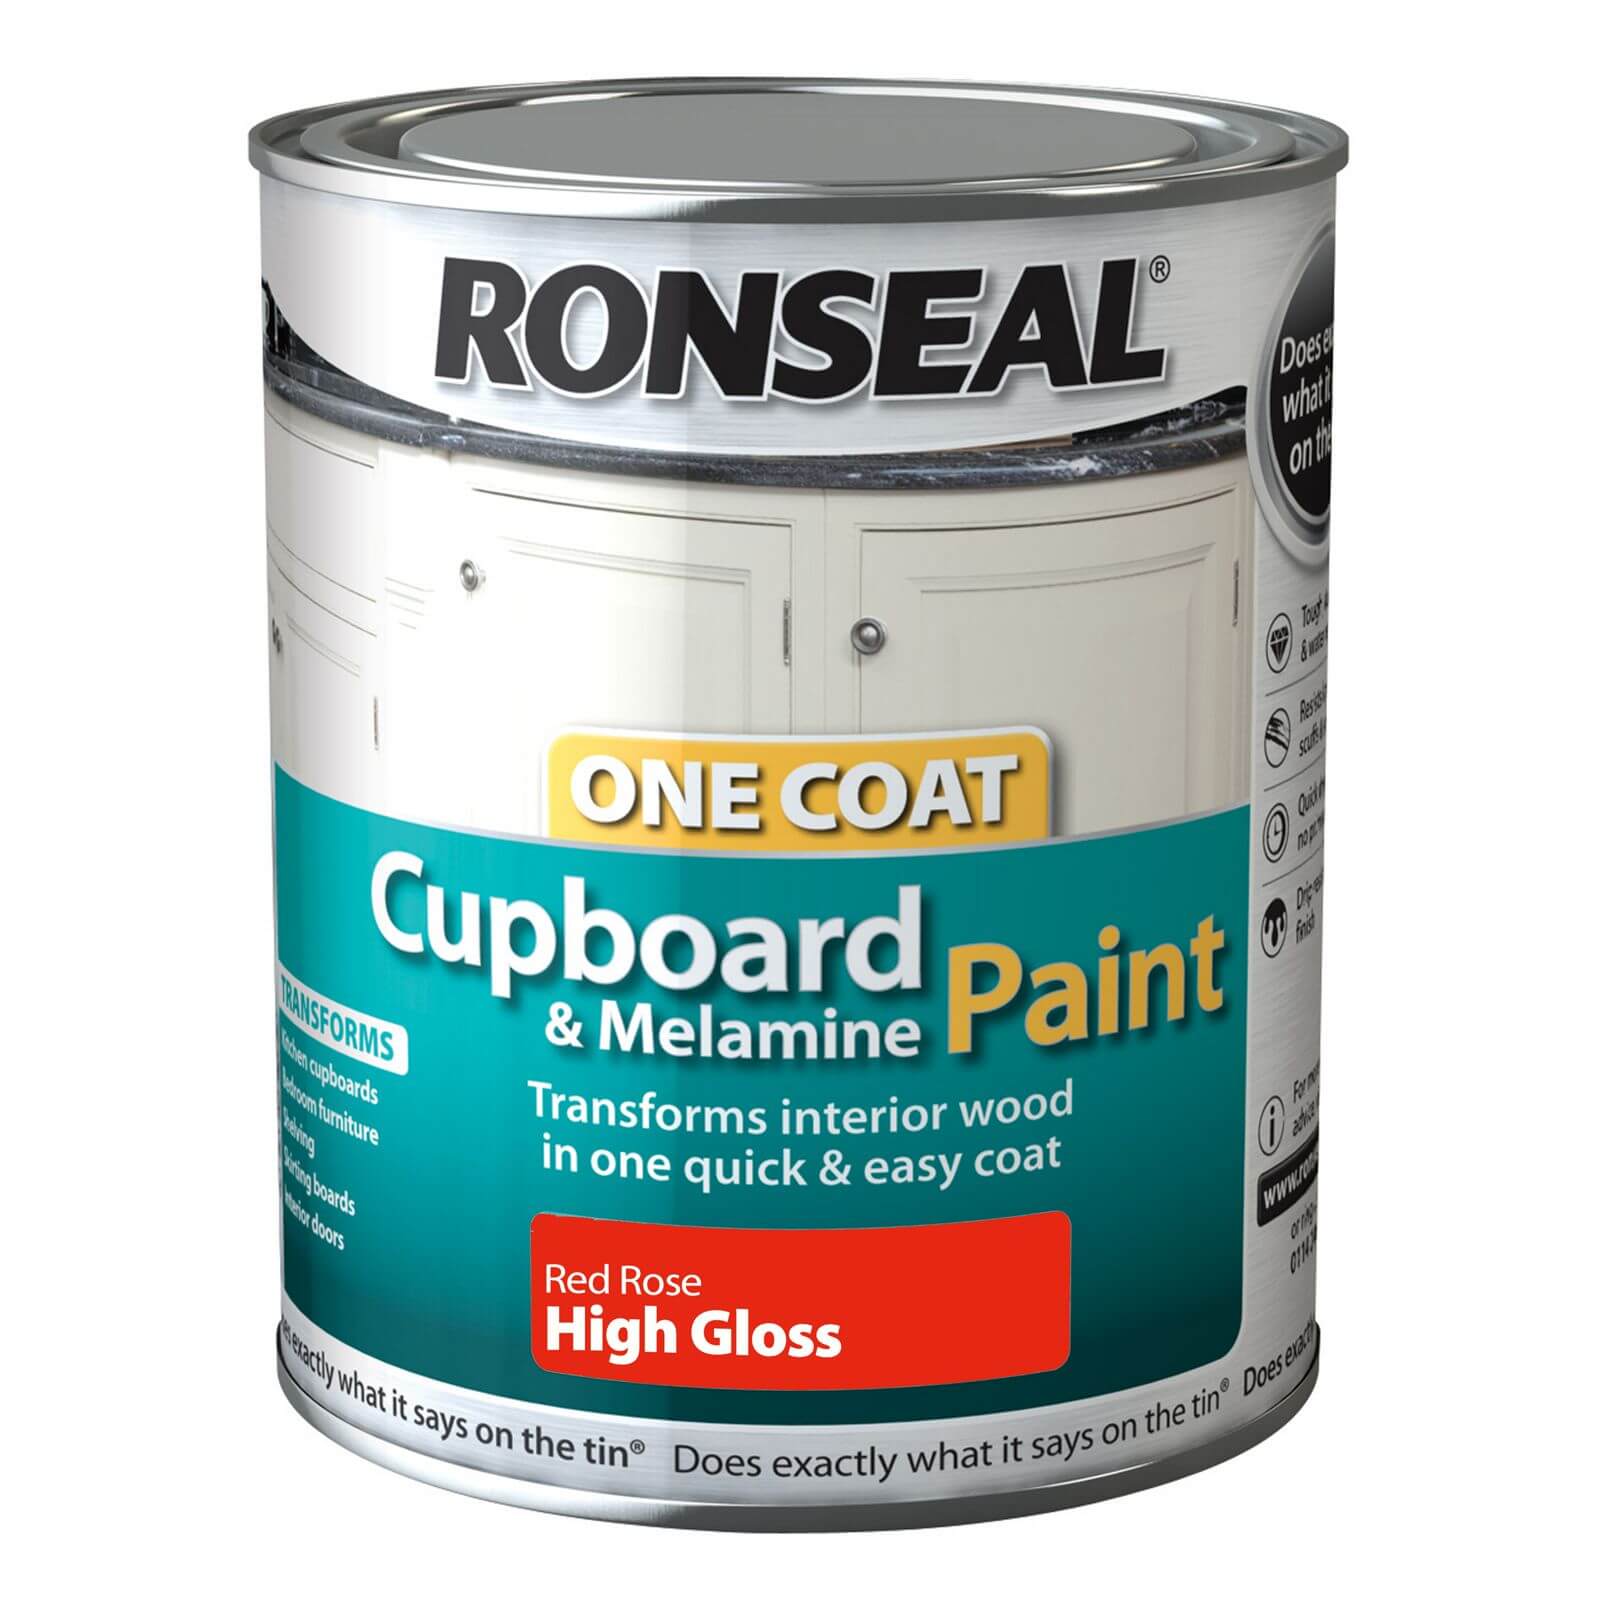 Ronseal One Coat Cupboard Melamine & MDF Paint Red Rose High Gloss 750ml